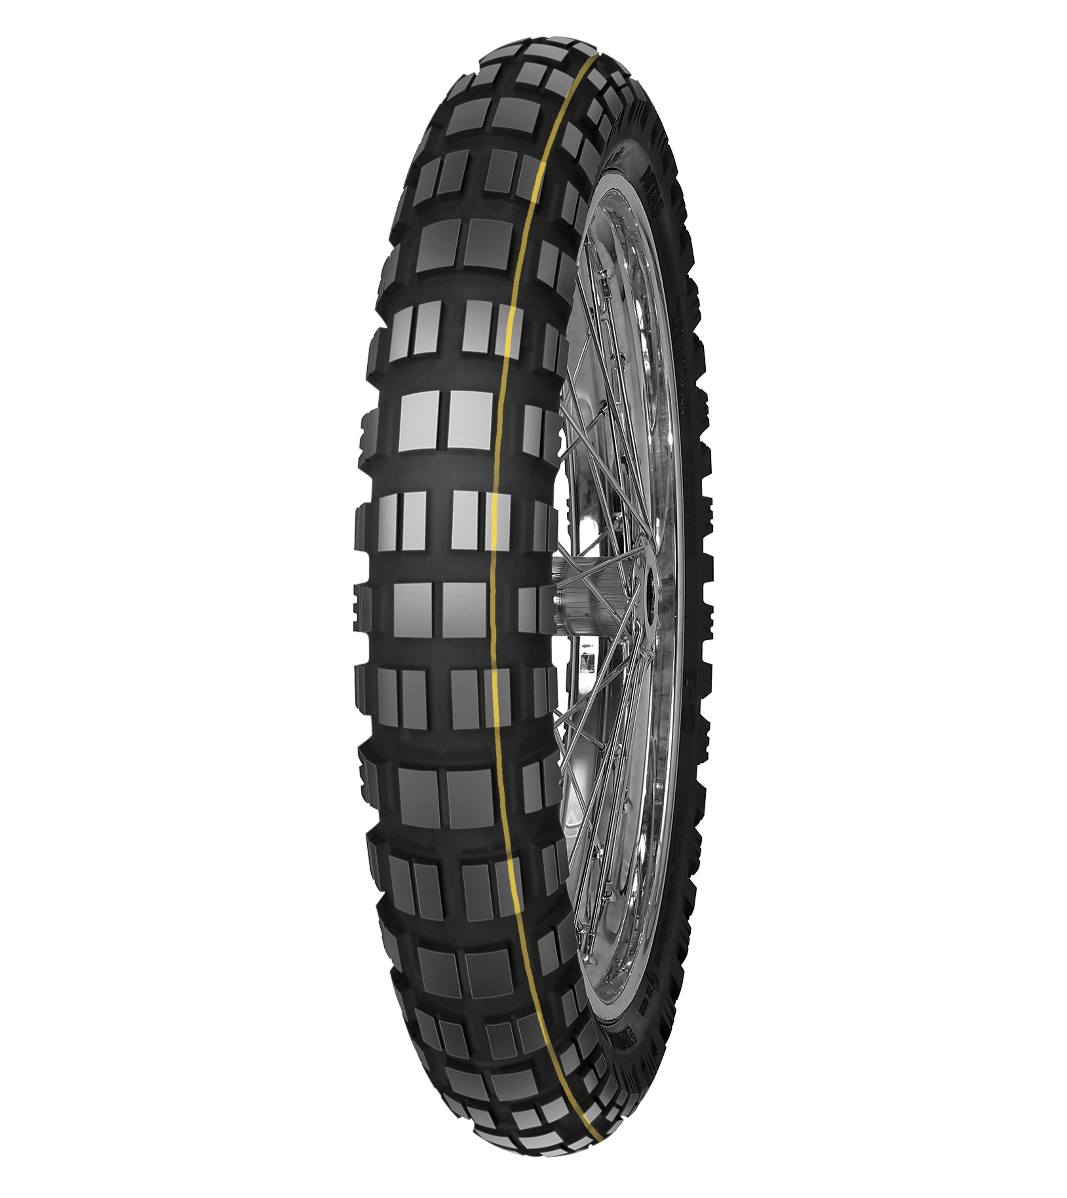 Mitas E-10 ENDURO 110/80B19 Trail OFF Trail DAKAR 59T Yellow Tubeless Front Tire, 224443, 110/80B19, Adventure Touring, E Series, E-10 Enduro, Front, Trail, Trail OFF, Tires - Imported and distributed in North & South America by Lindeco Genuine Powersports - Premier Powersports Equipment and Accessories for Motorcycle Enthusiasts, Professional Riders and Dealers.